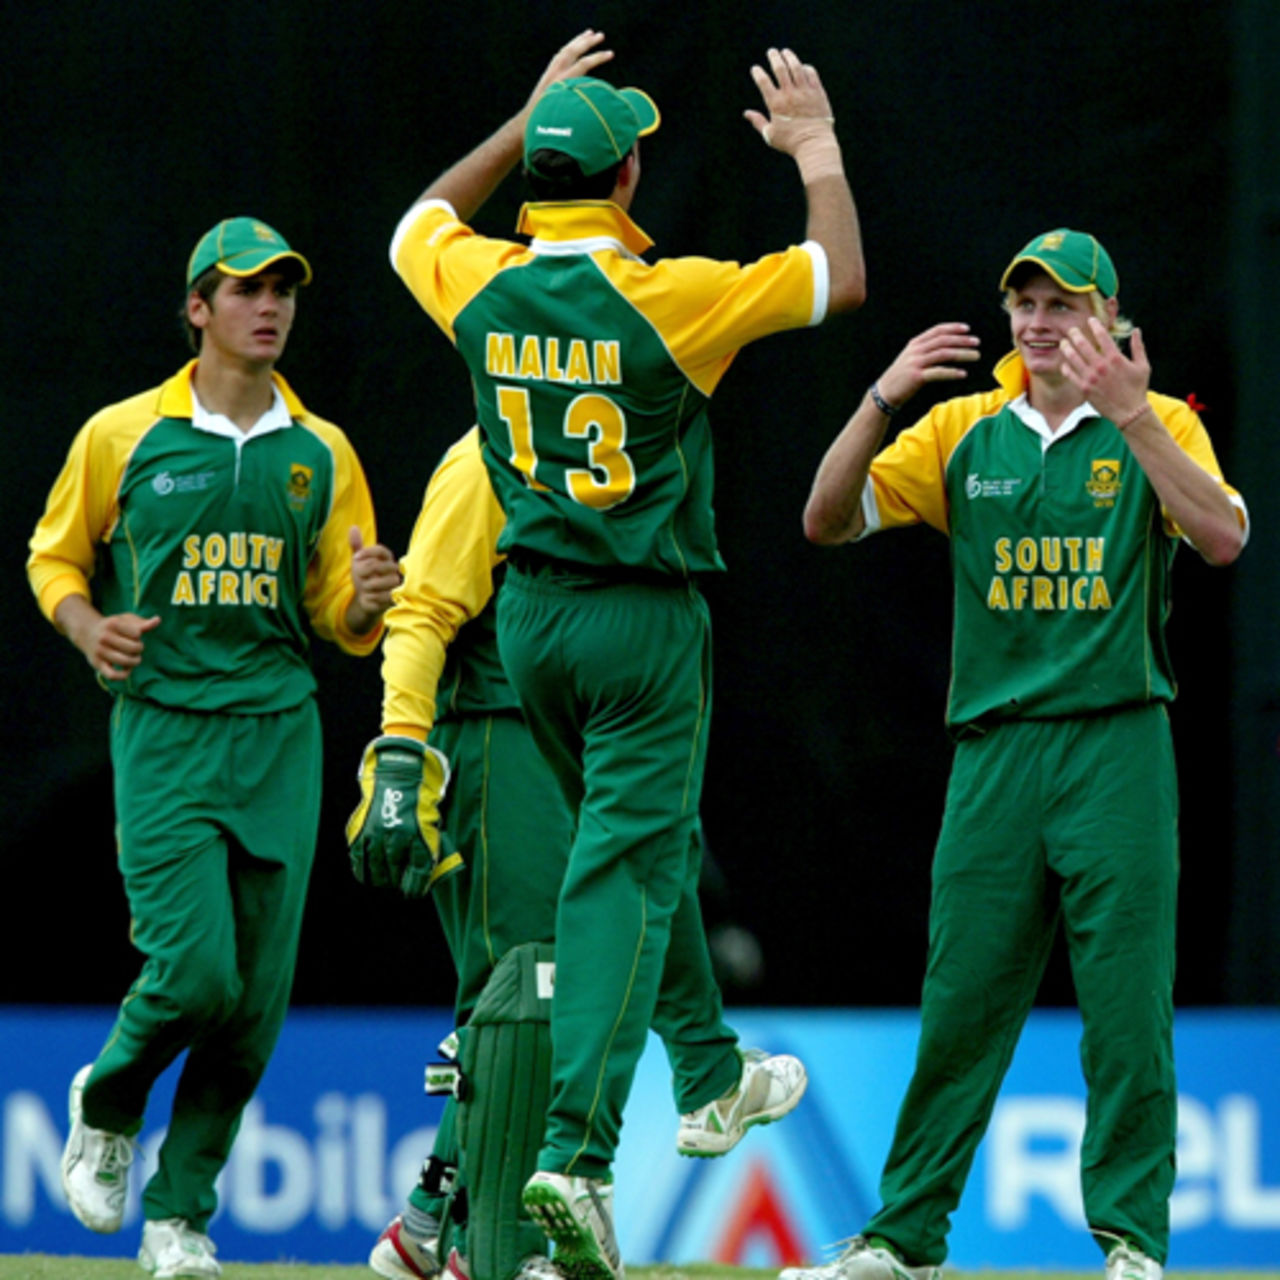 Sybrand Engelbrecht (right) is congratulated by his team-mates after taking a catch, India v South Africa, Under-19 World Cup final, Kuala Lumpur, March 2, 2008 
